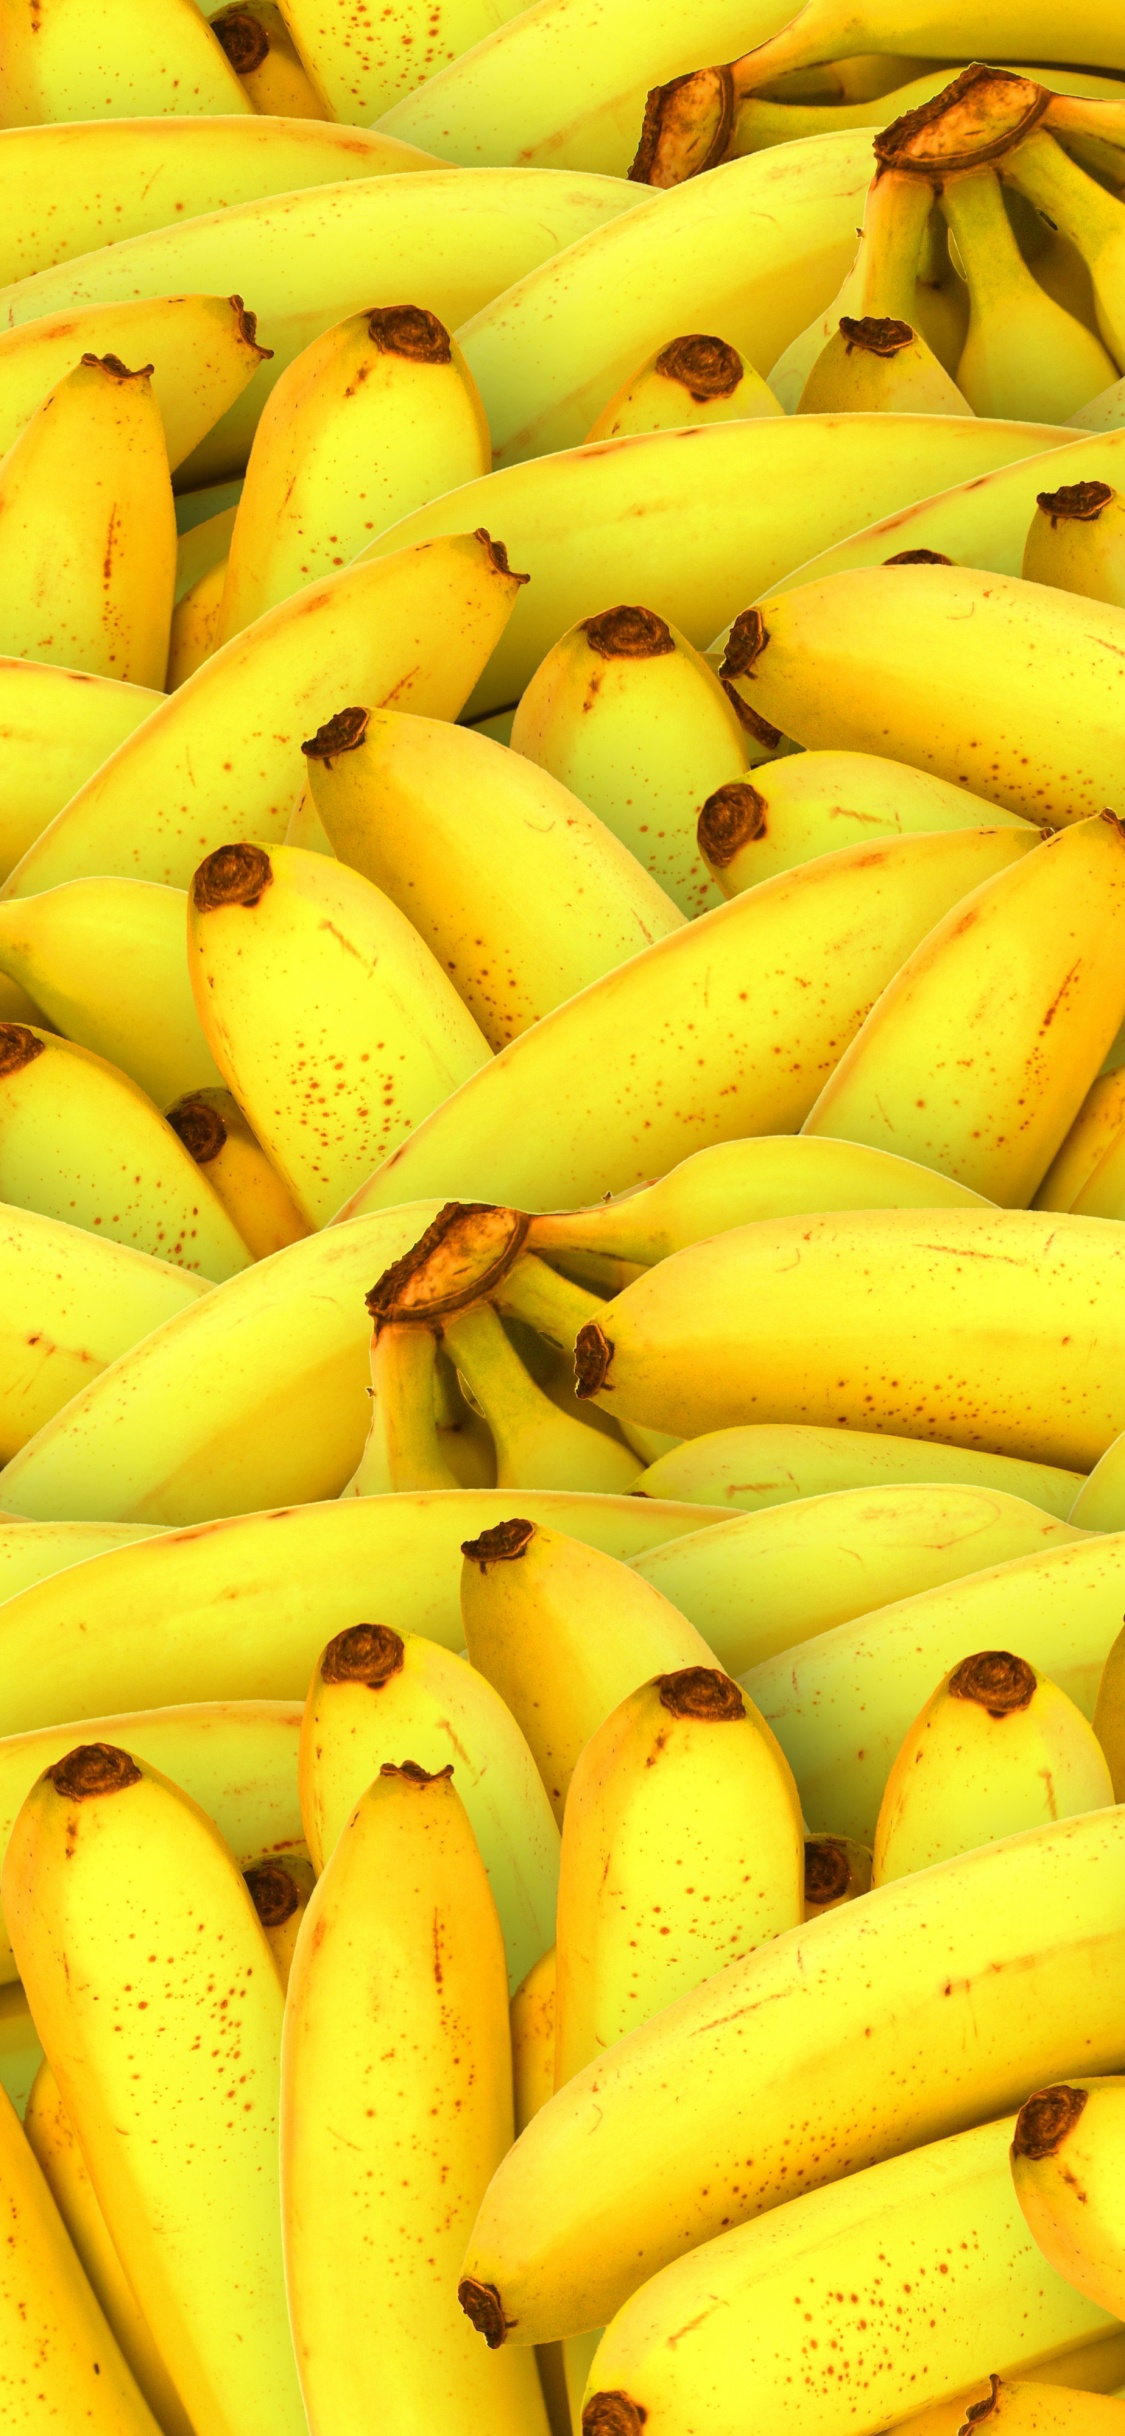 Yellow Banana Fruit on Brown Wooden Table. Wallpaper in 1125x2436 Resolution